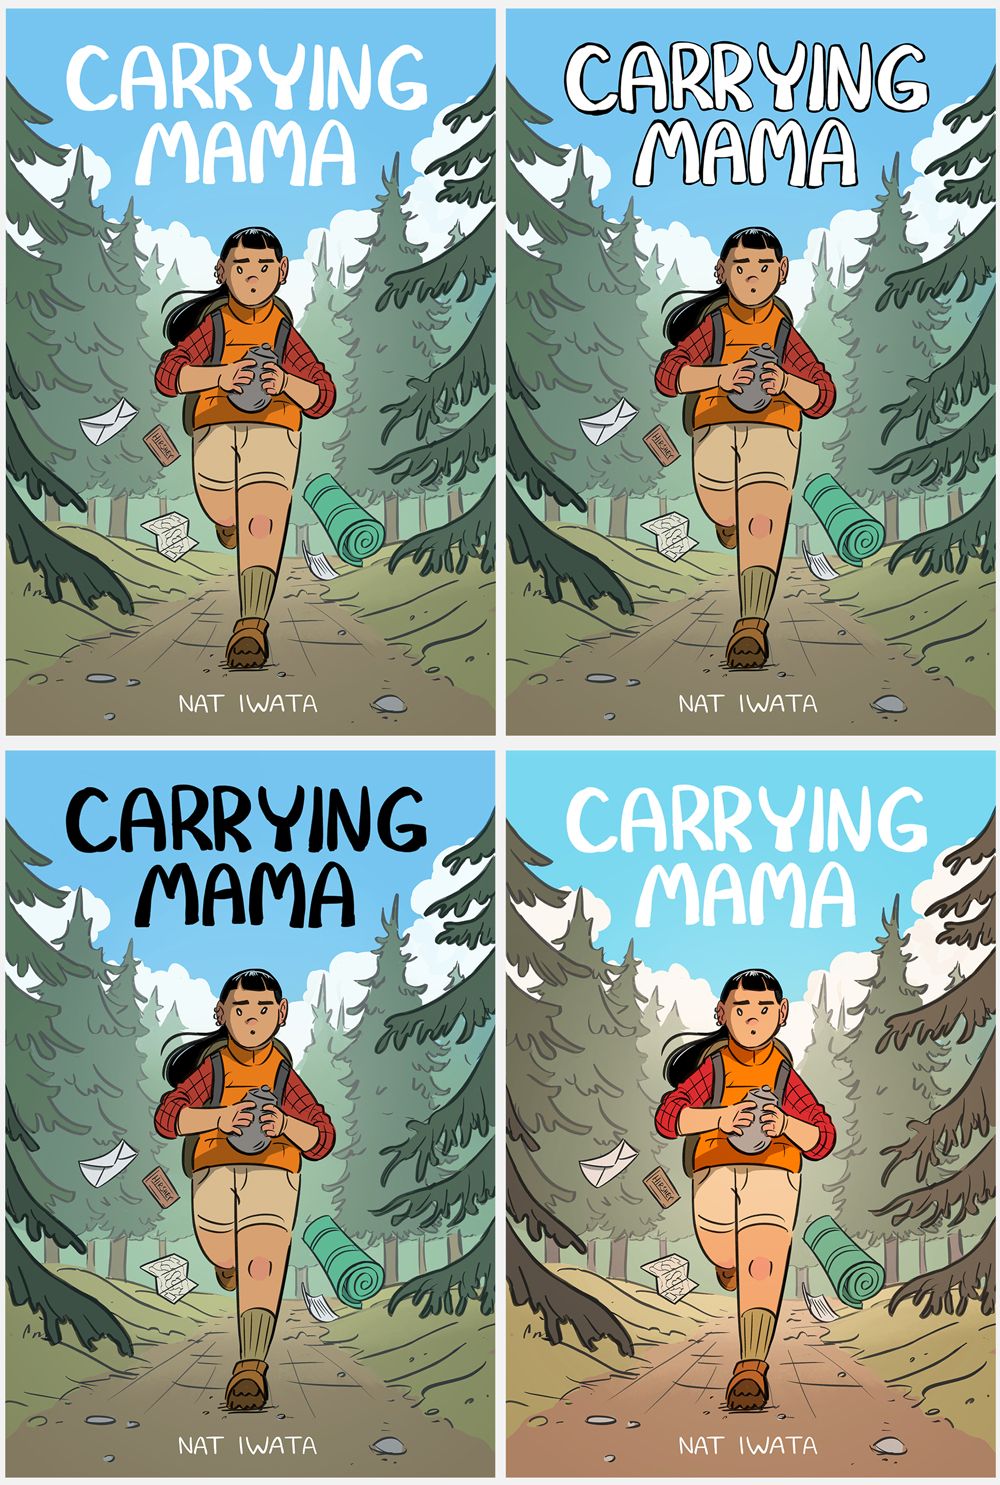 CarryingMamaCover_Options.jpg